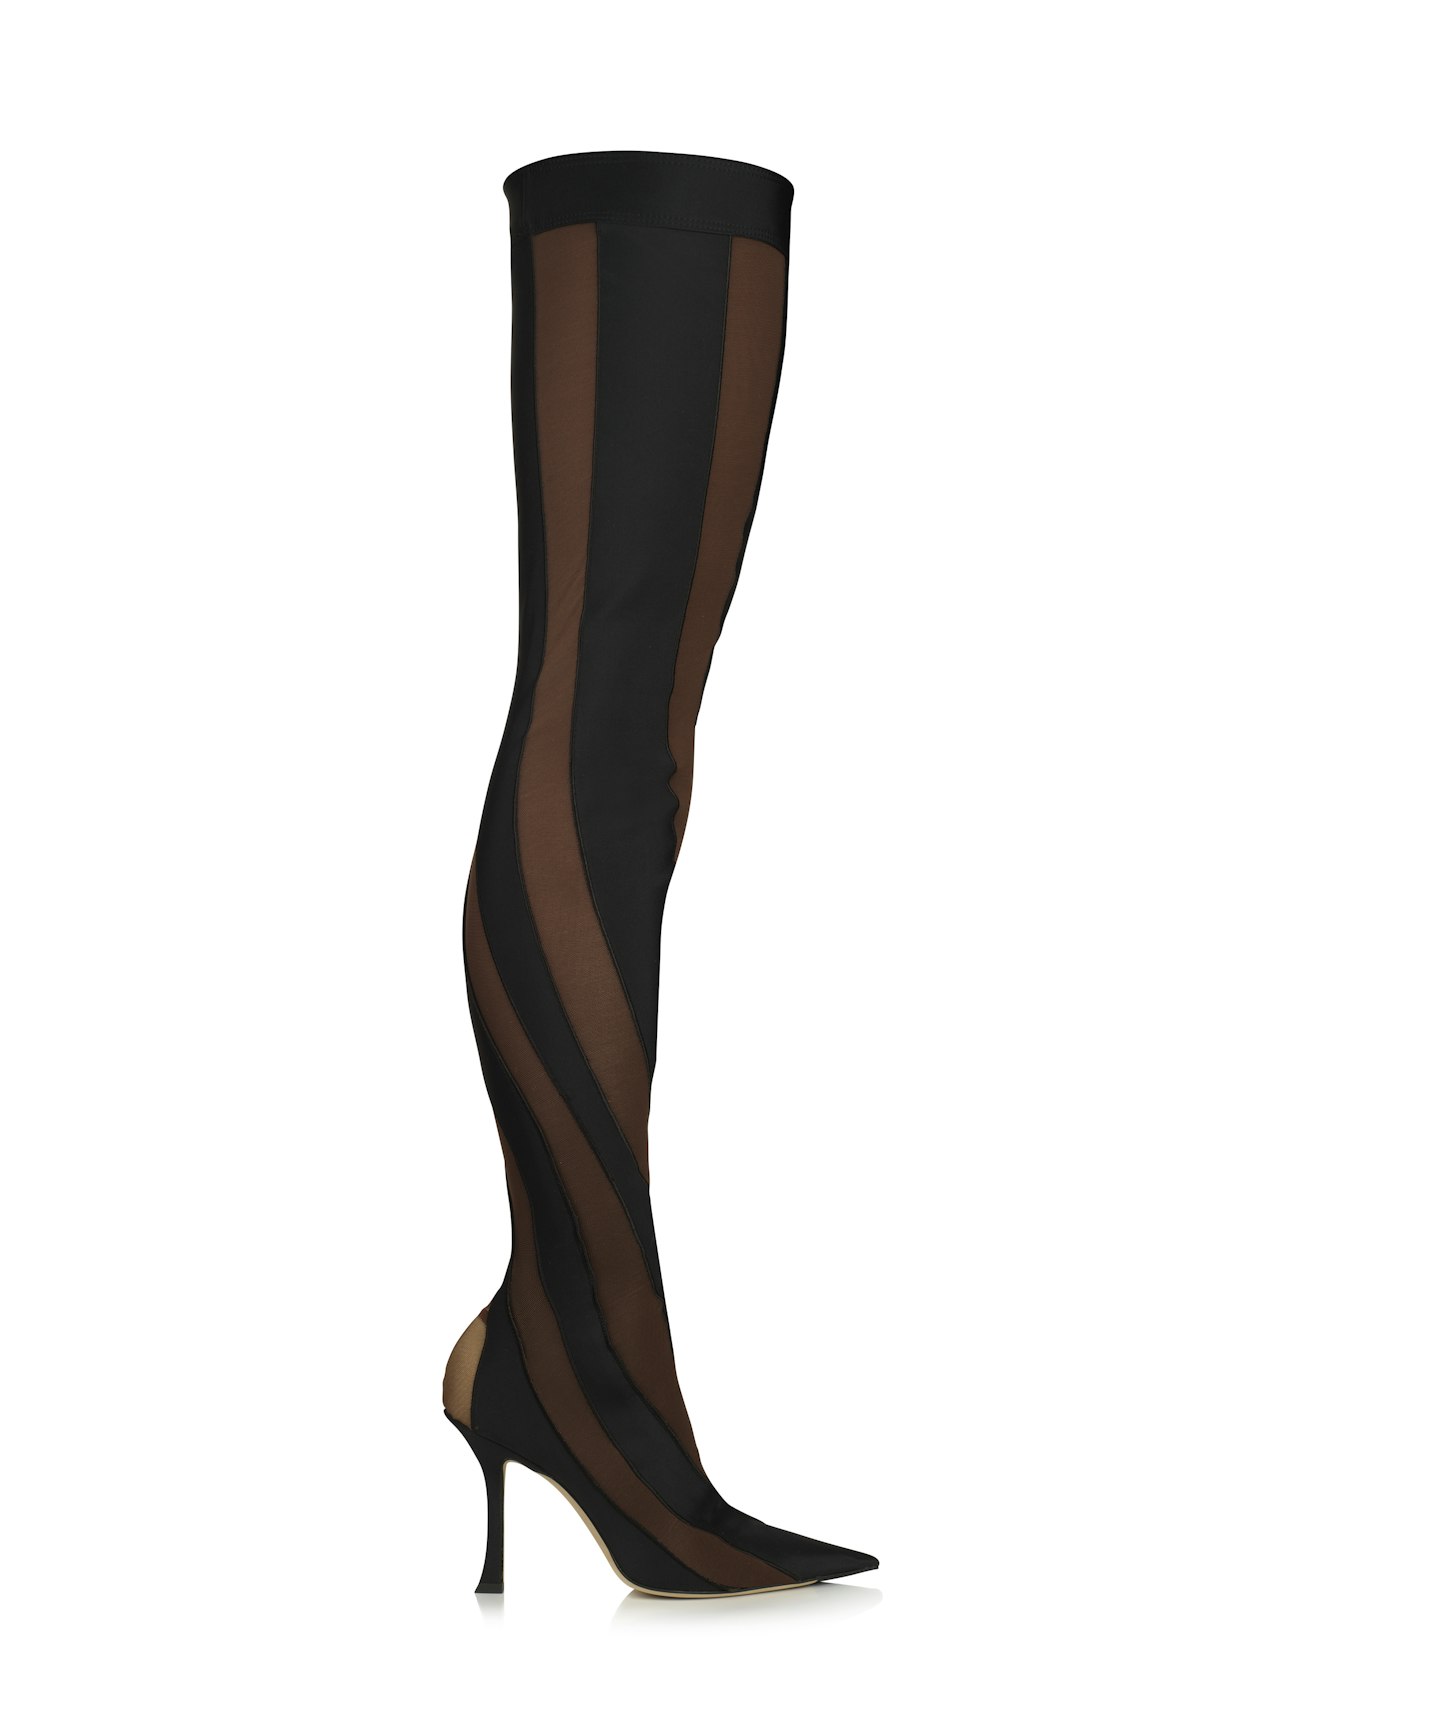 Jimmy Choo Mugler Black and Dark Nude Sheer Spiral Stretch Fabric Sock Over-The-Knee Boots, £1,425